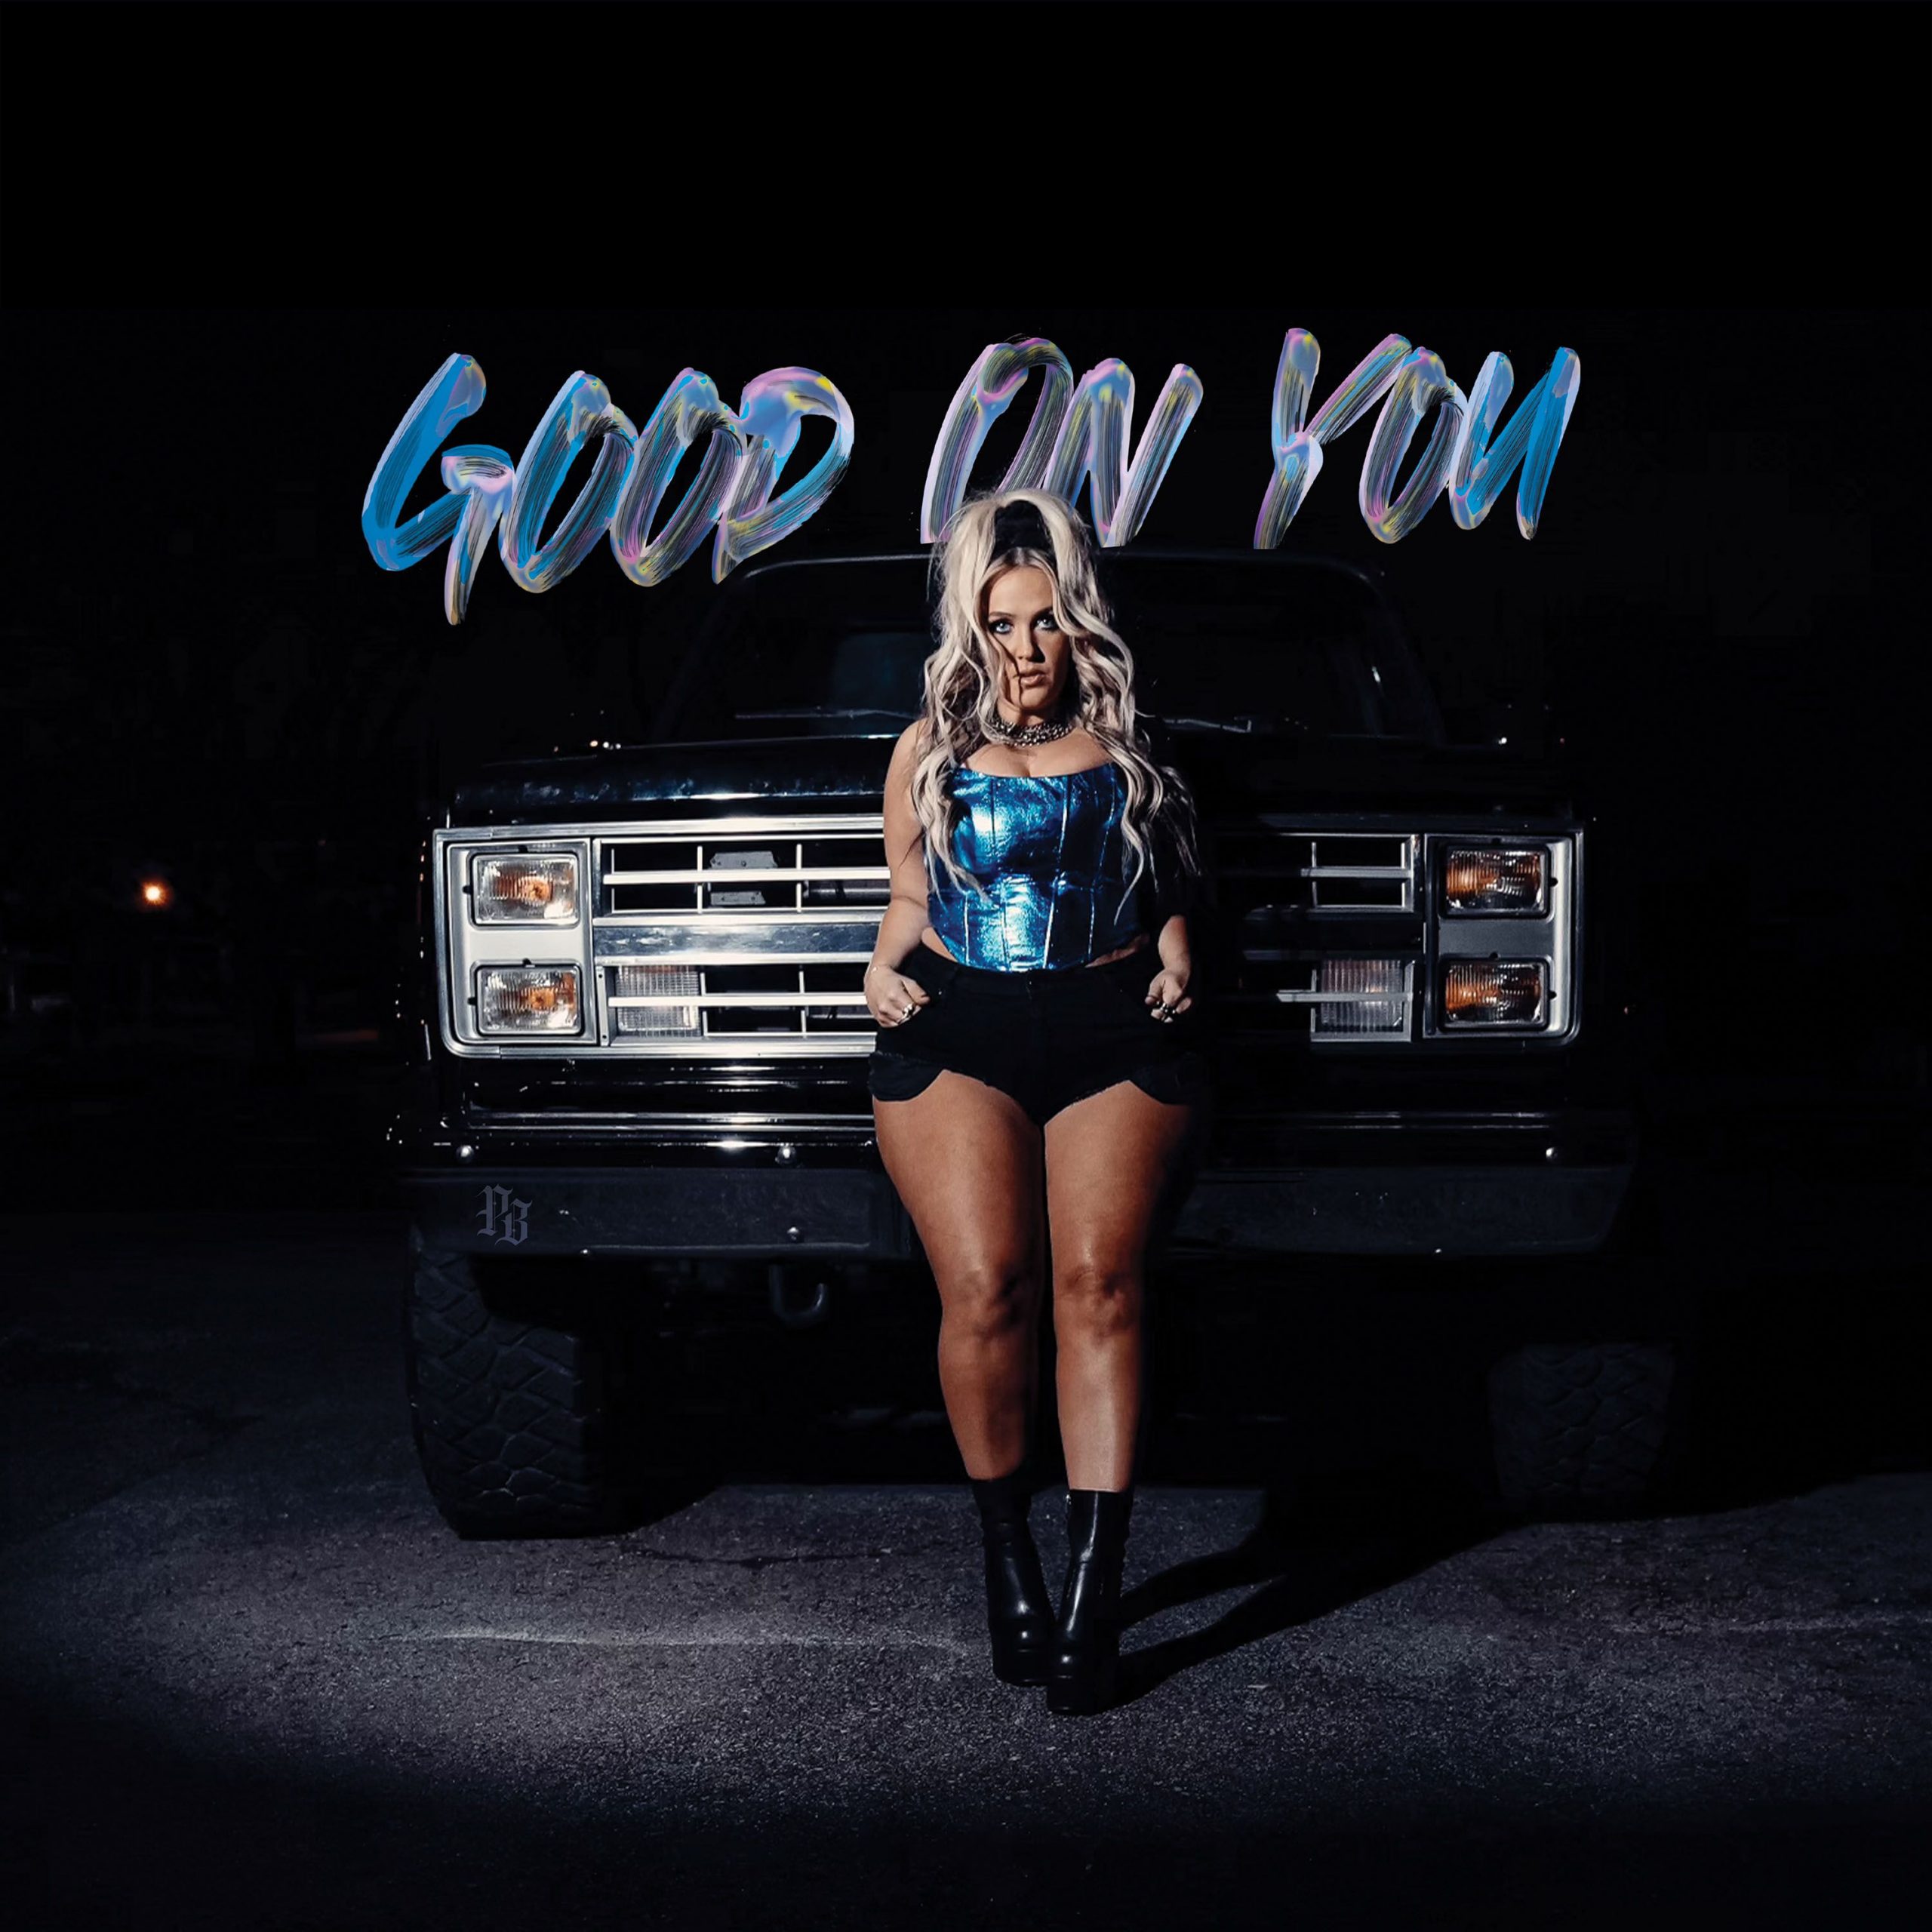 PRISCILLA BLOCK RELEASES BOLD NEW TRACK “GOOD ON YOU”